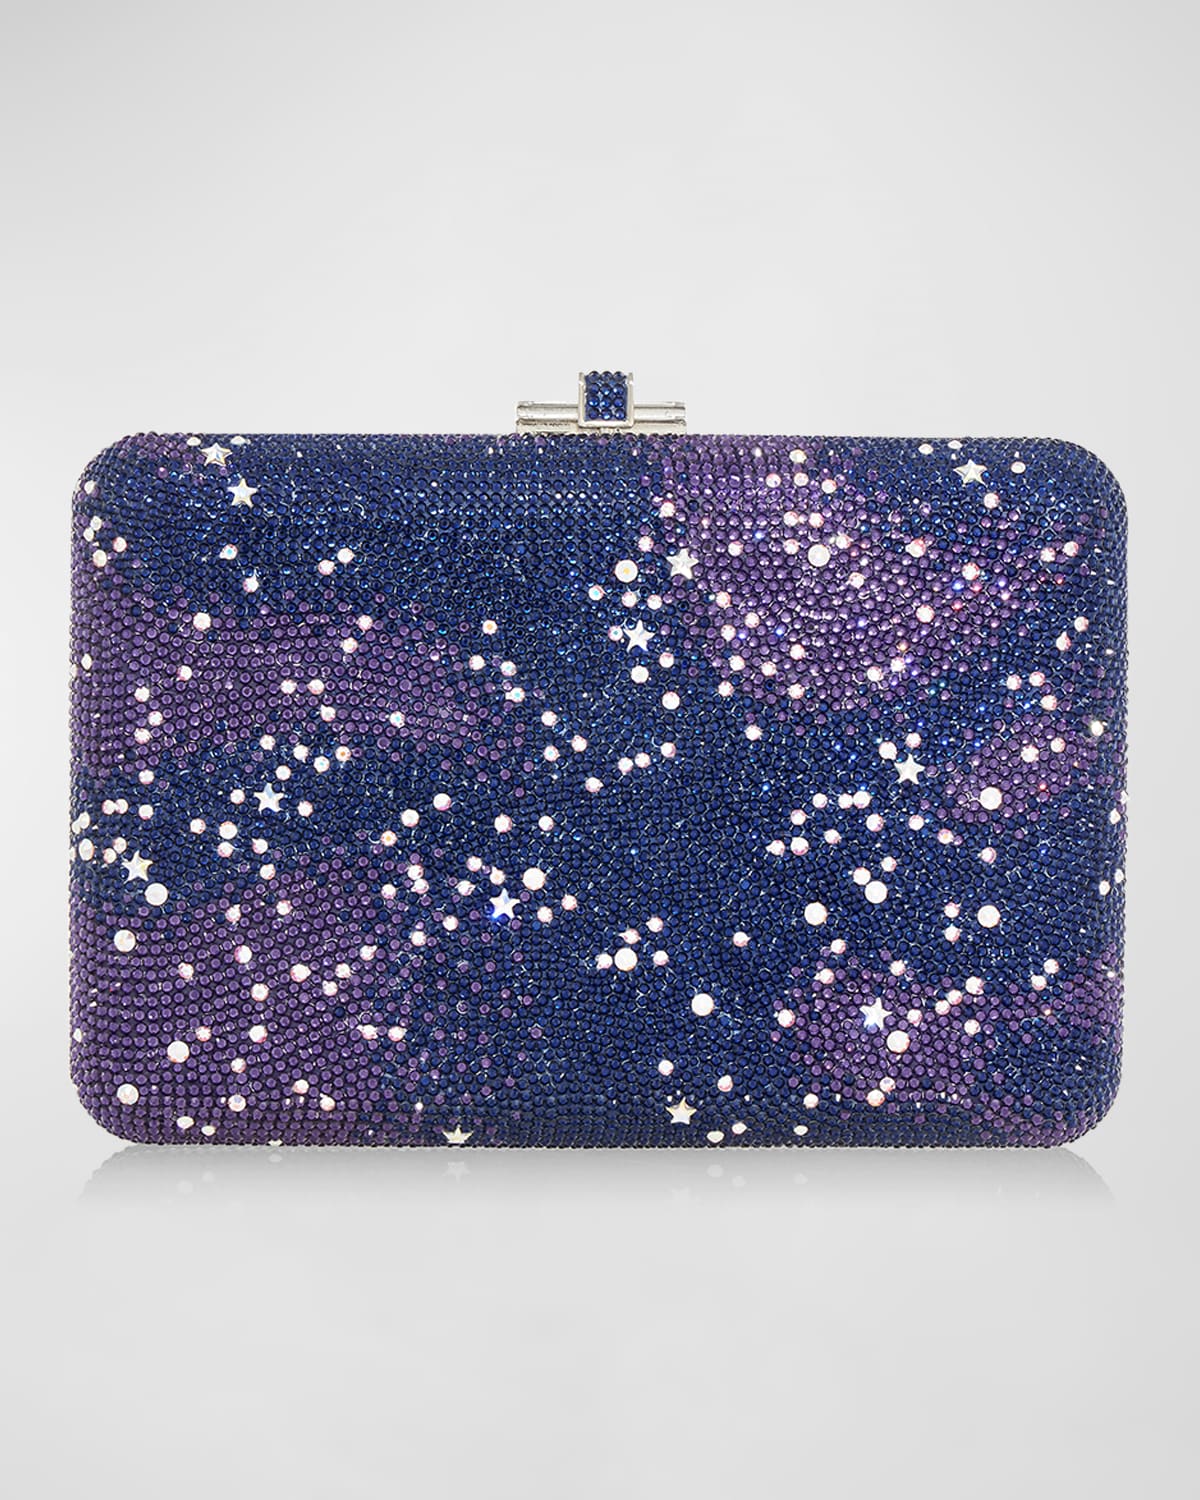 Slim Slide Galaxy Clutch With Removable Shoulder Chain